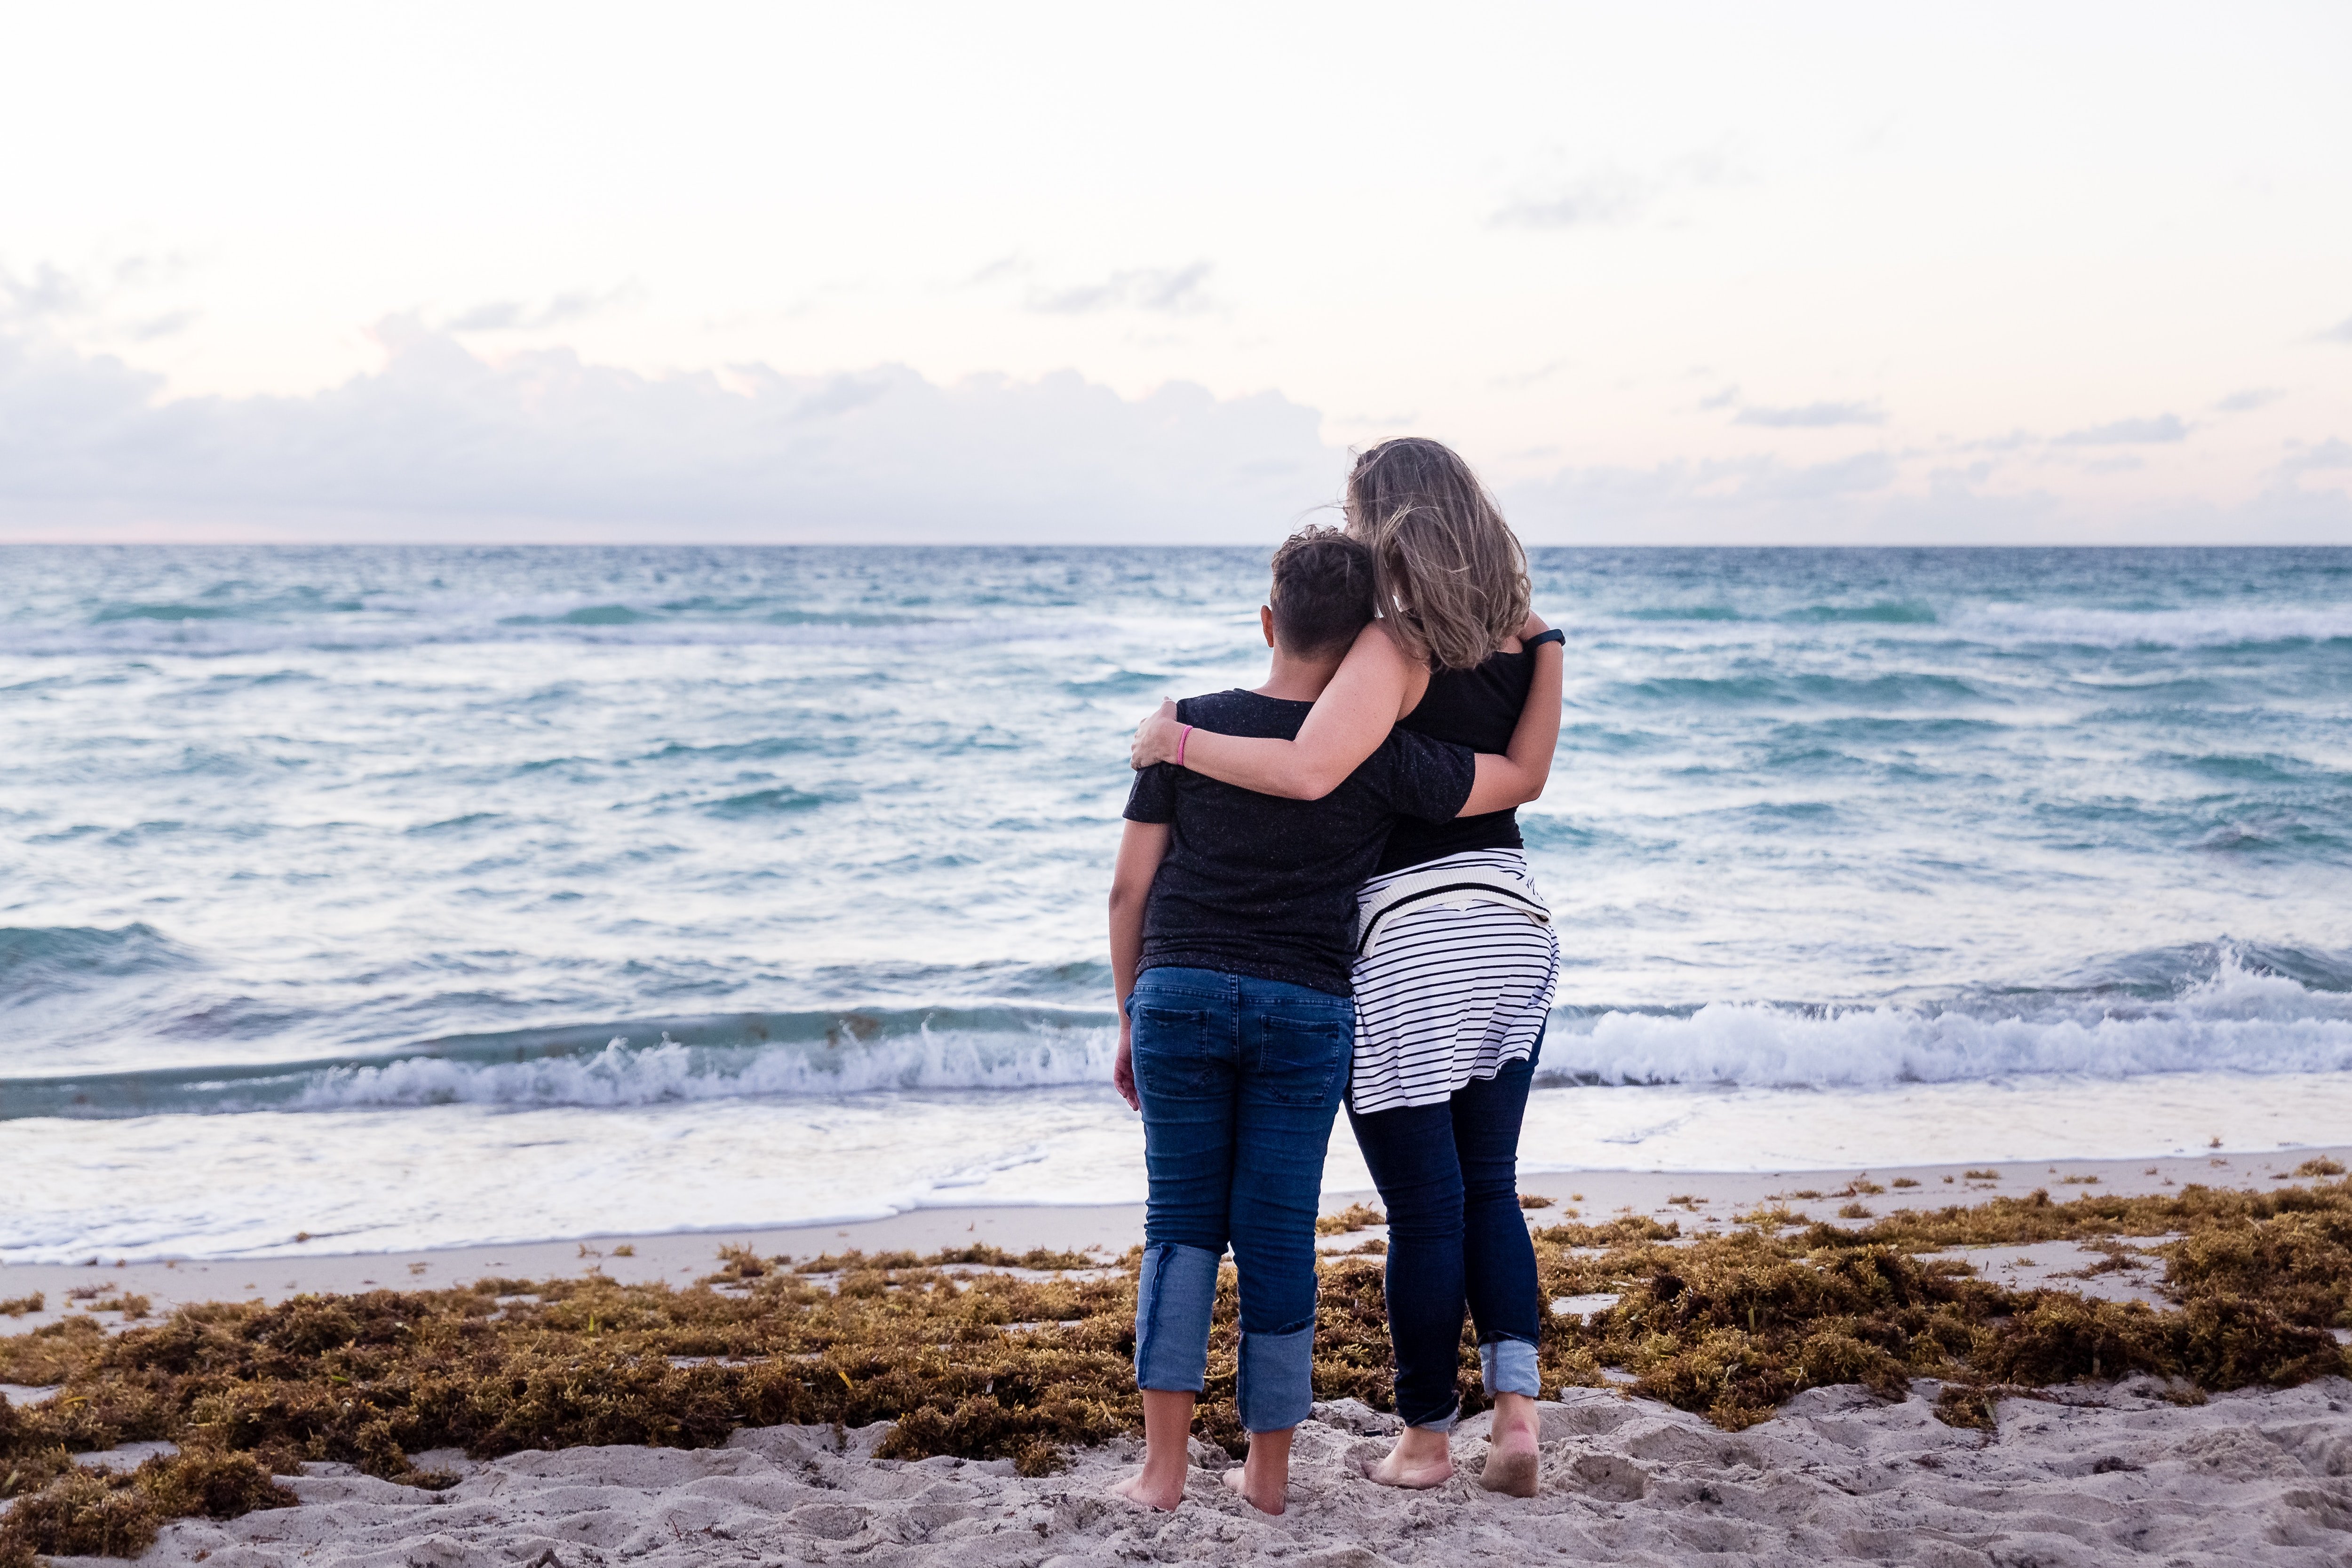 A mother and son at the beach | Source: Unsplash.com